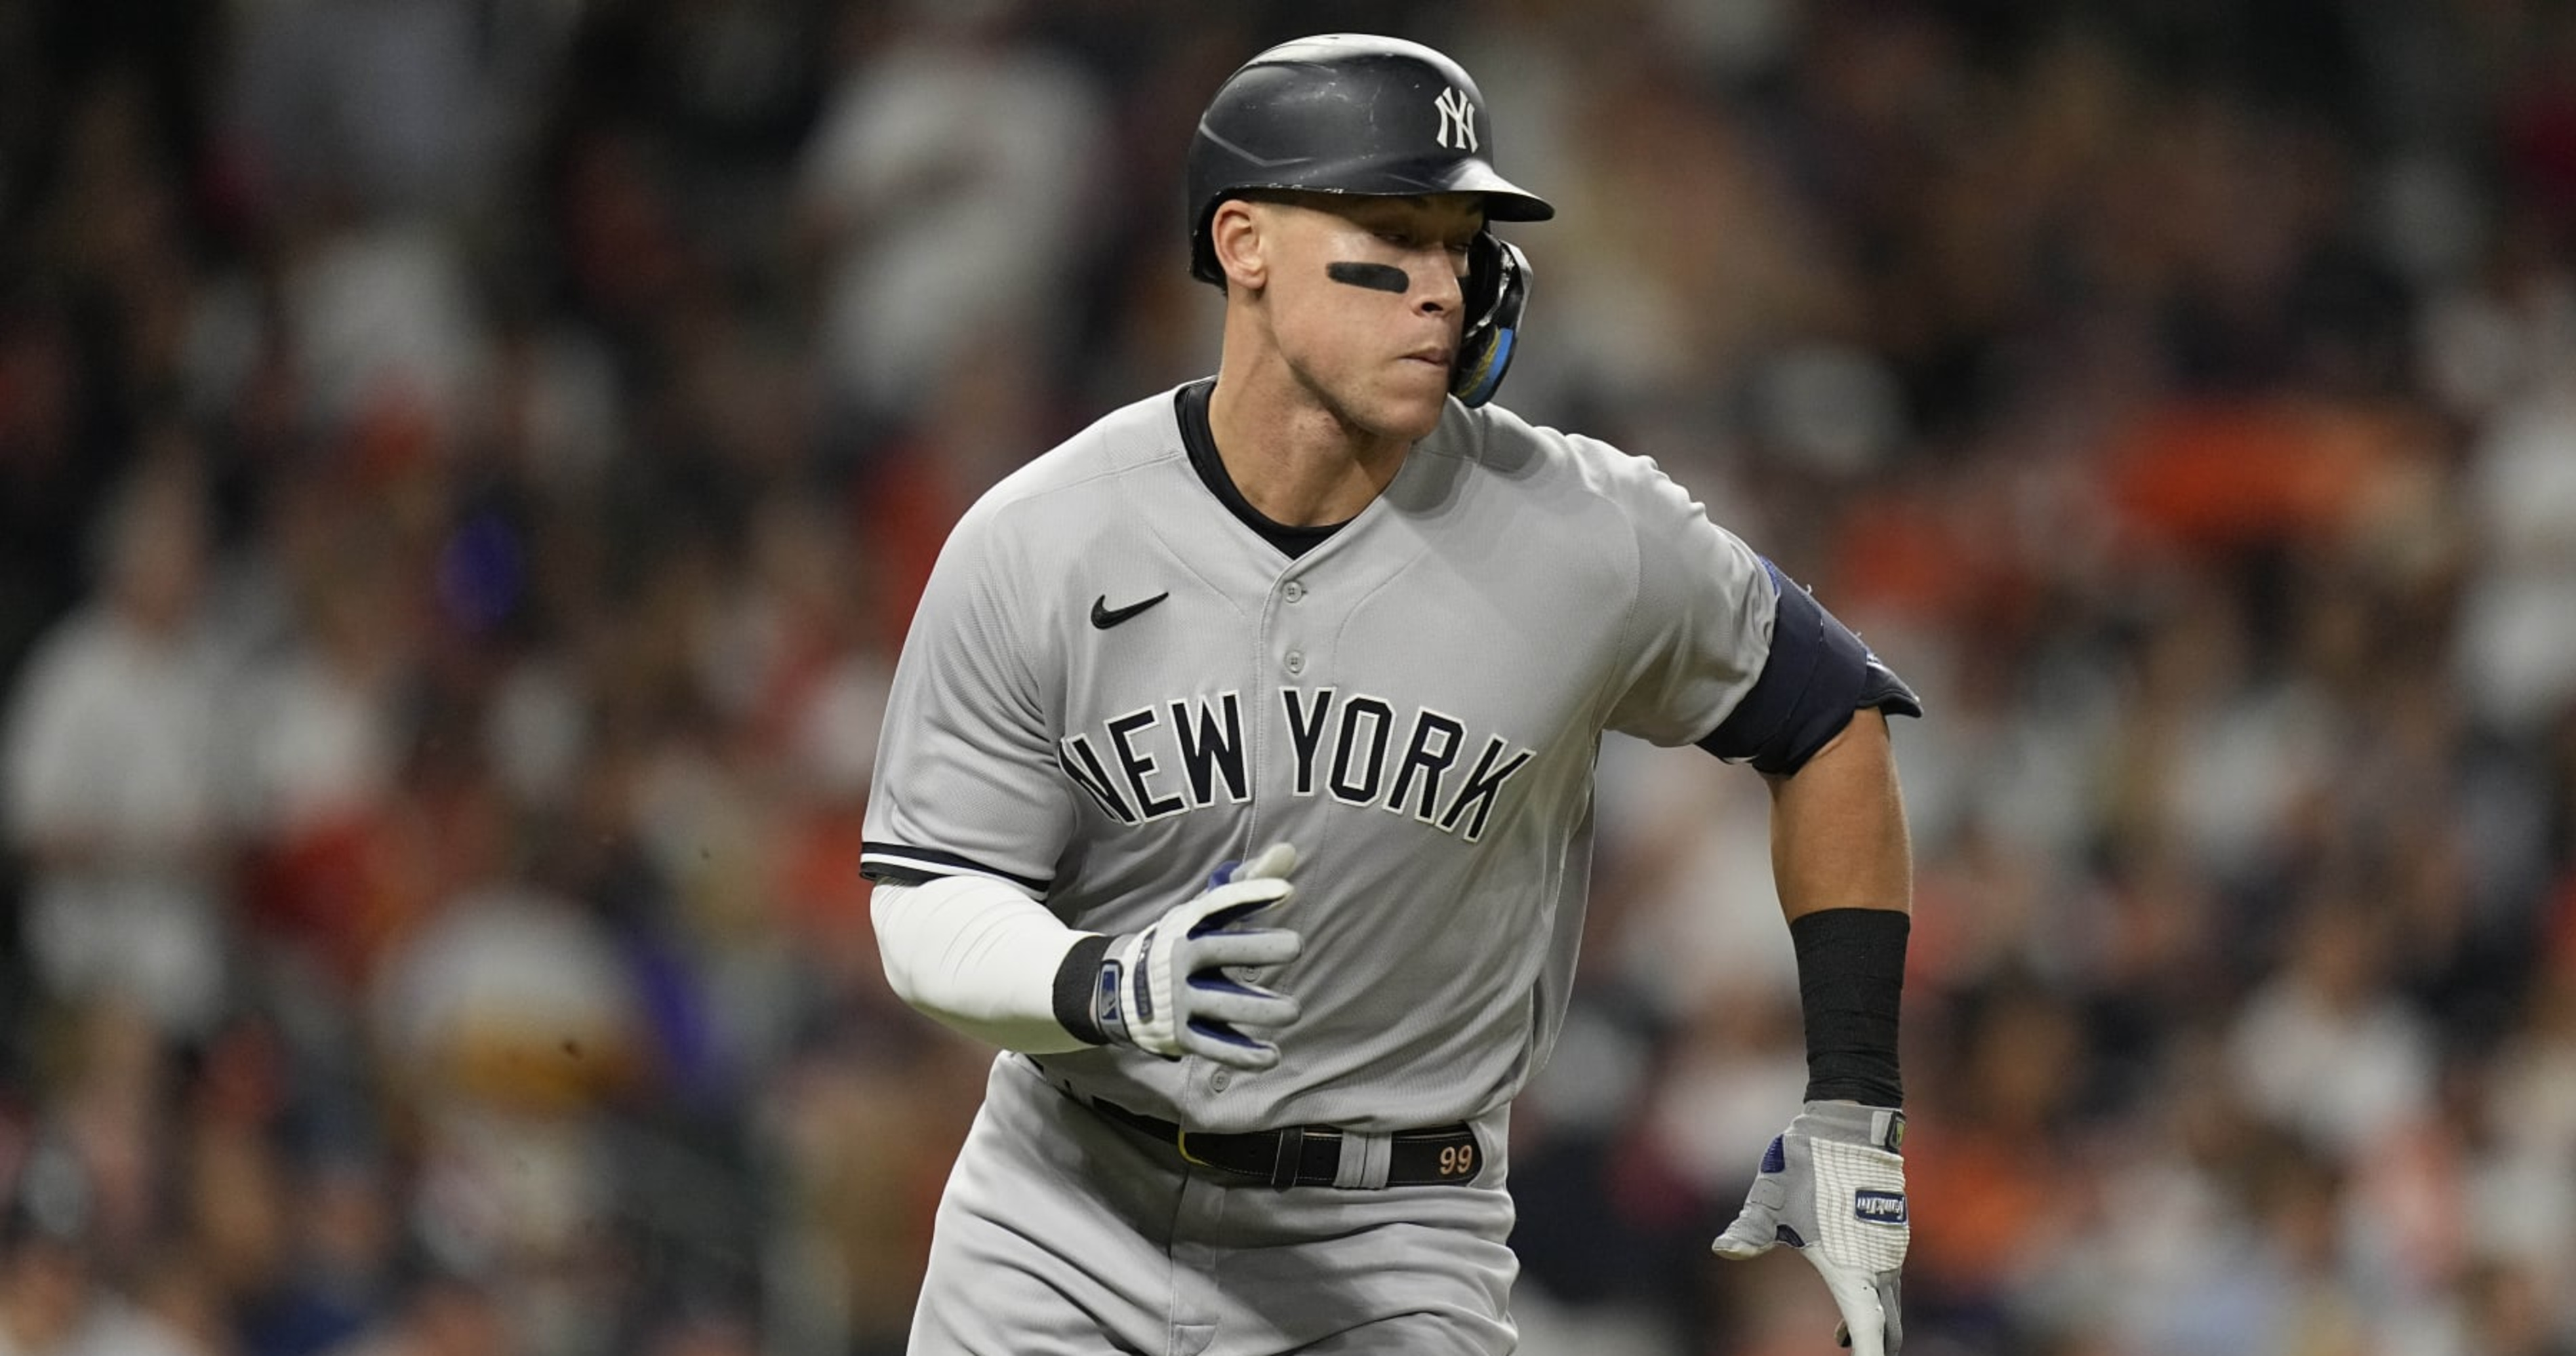 Aaron Judge plays emotional role in MLB tribute to Hank Aaron